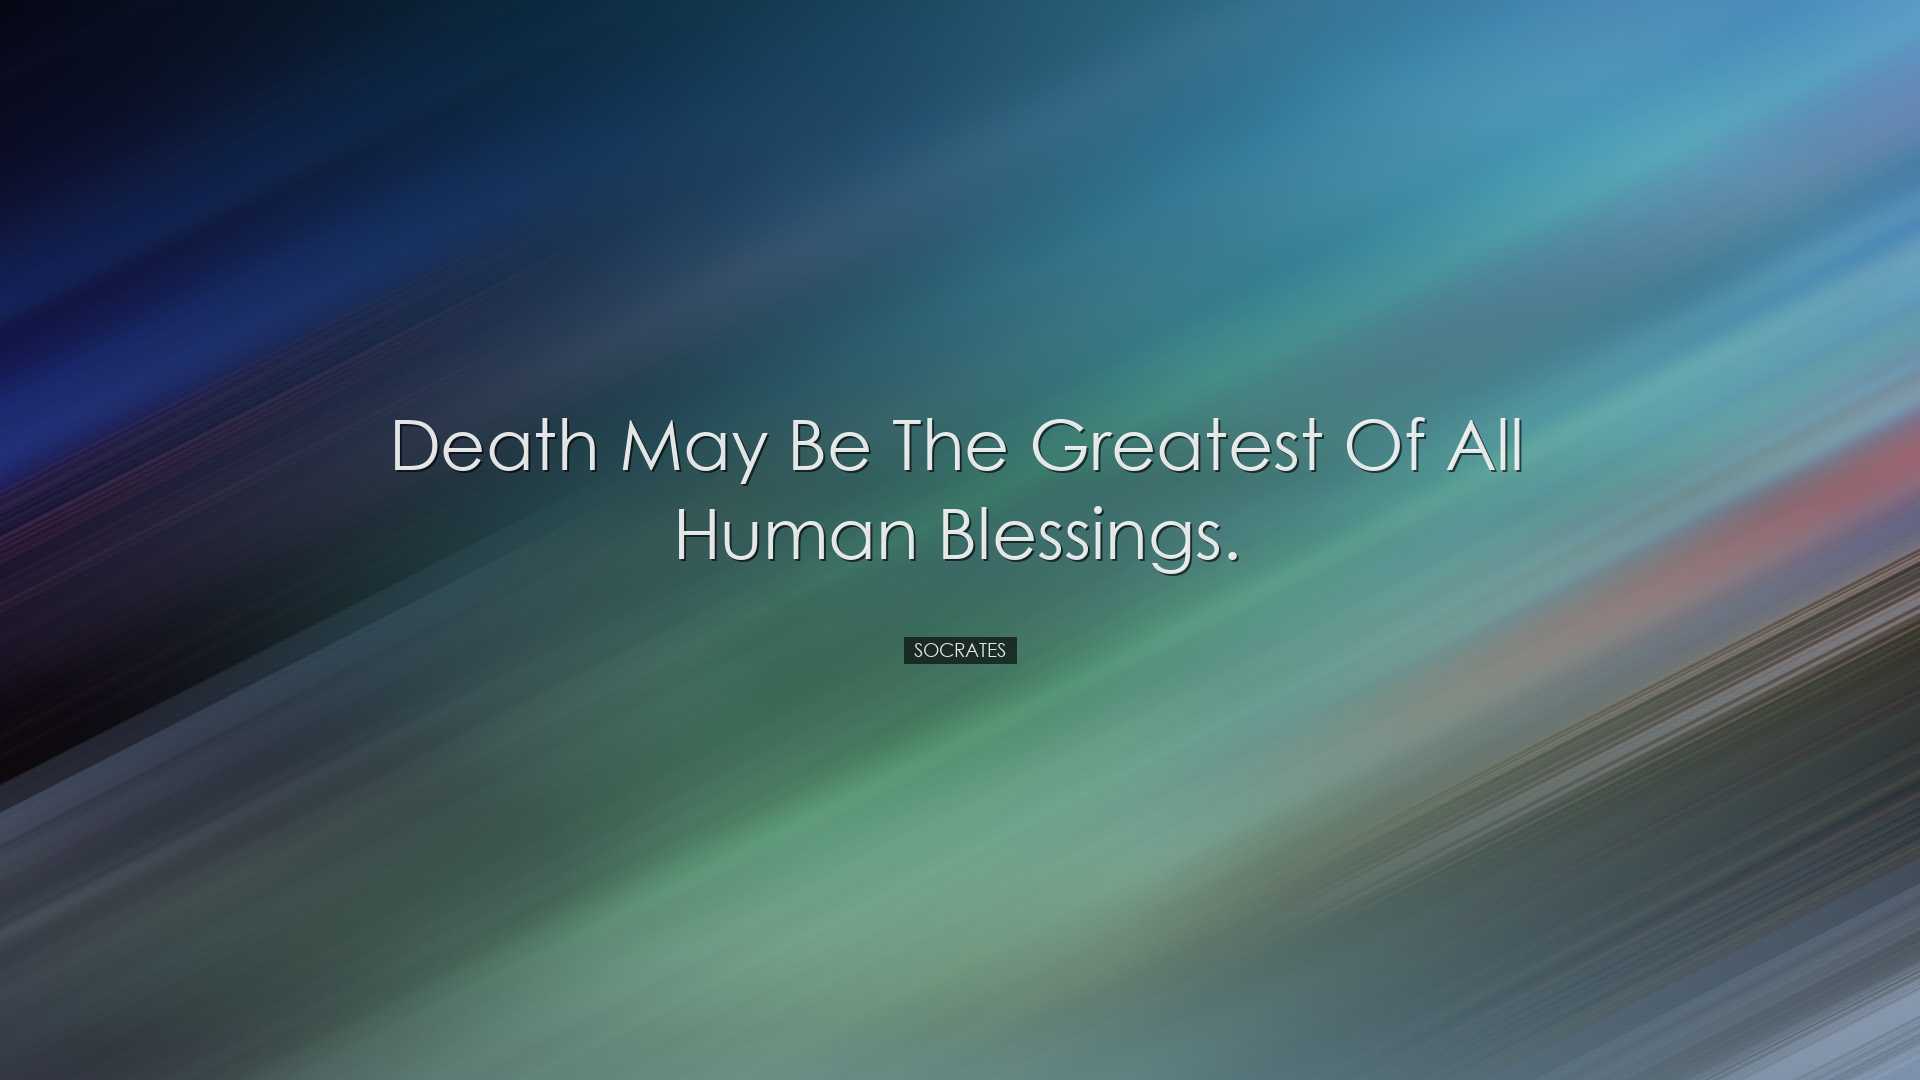 Death may be the greatest of all human blessings. - Socrates